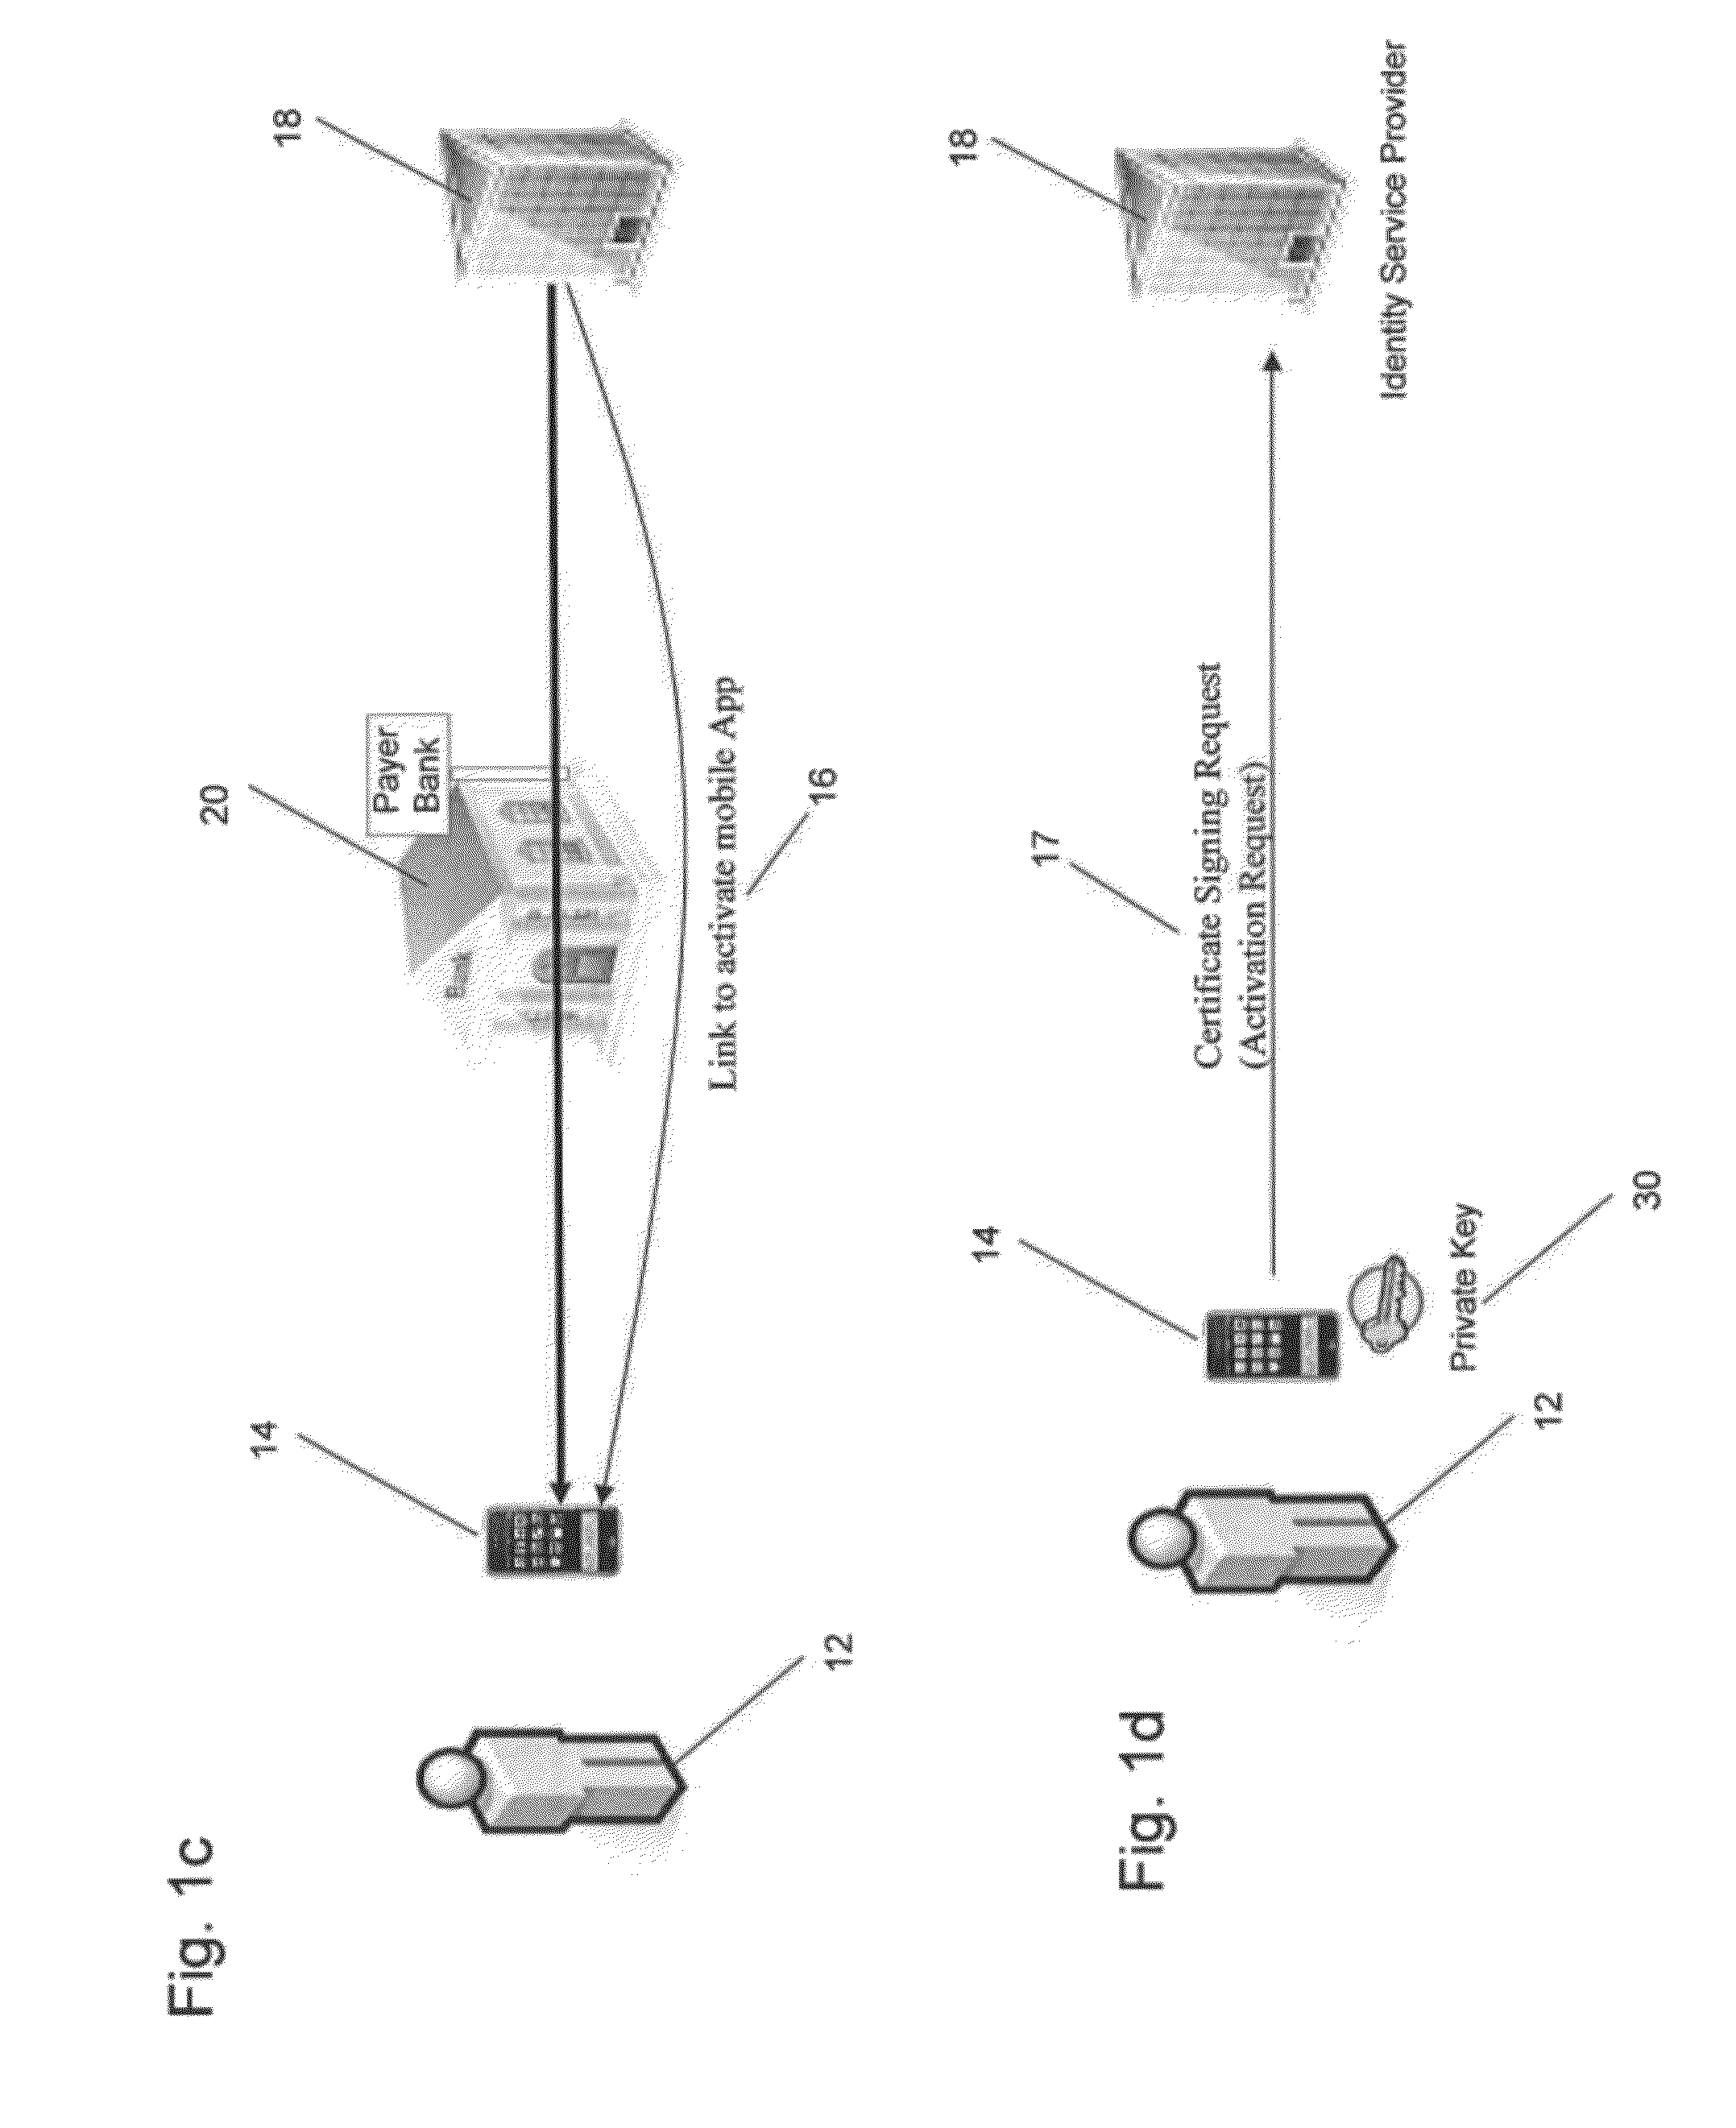 Method and System for Secure Financial Transactions Using Mobile Communications Devices